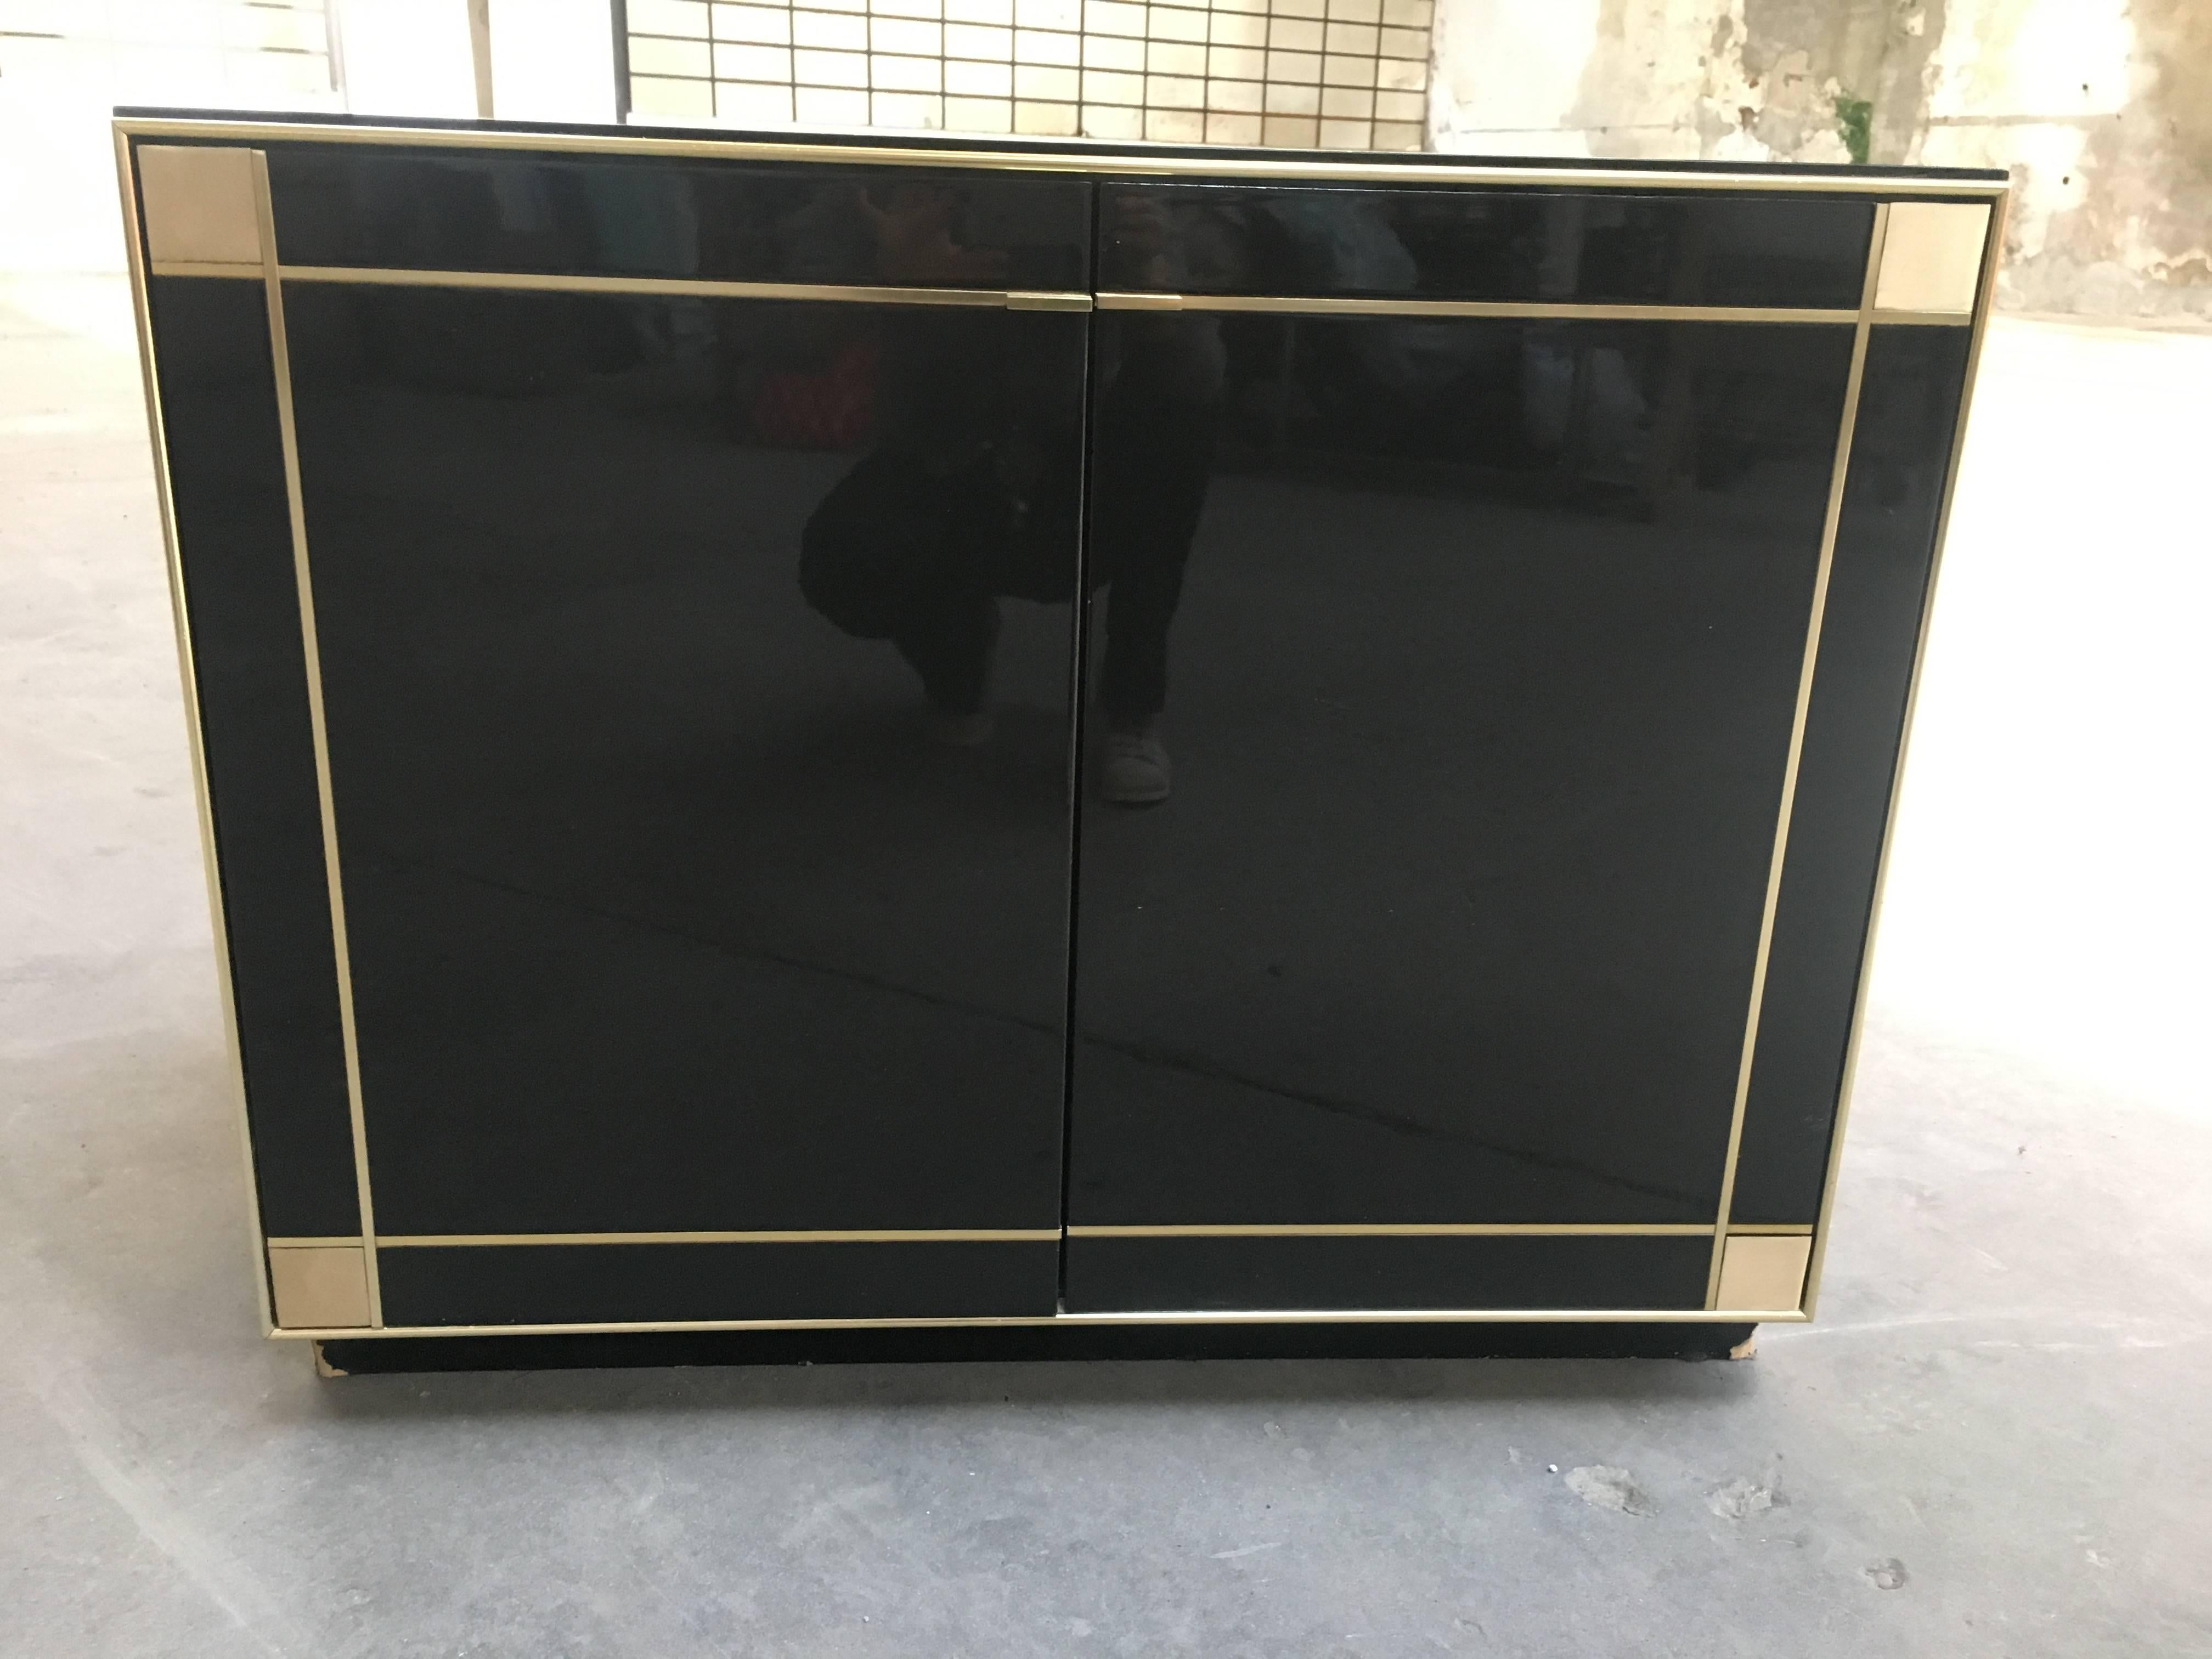 Italian low cabinet with brass details from 1970s.
Measurements: cm 90 x 55 x H 63.